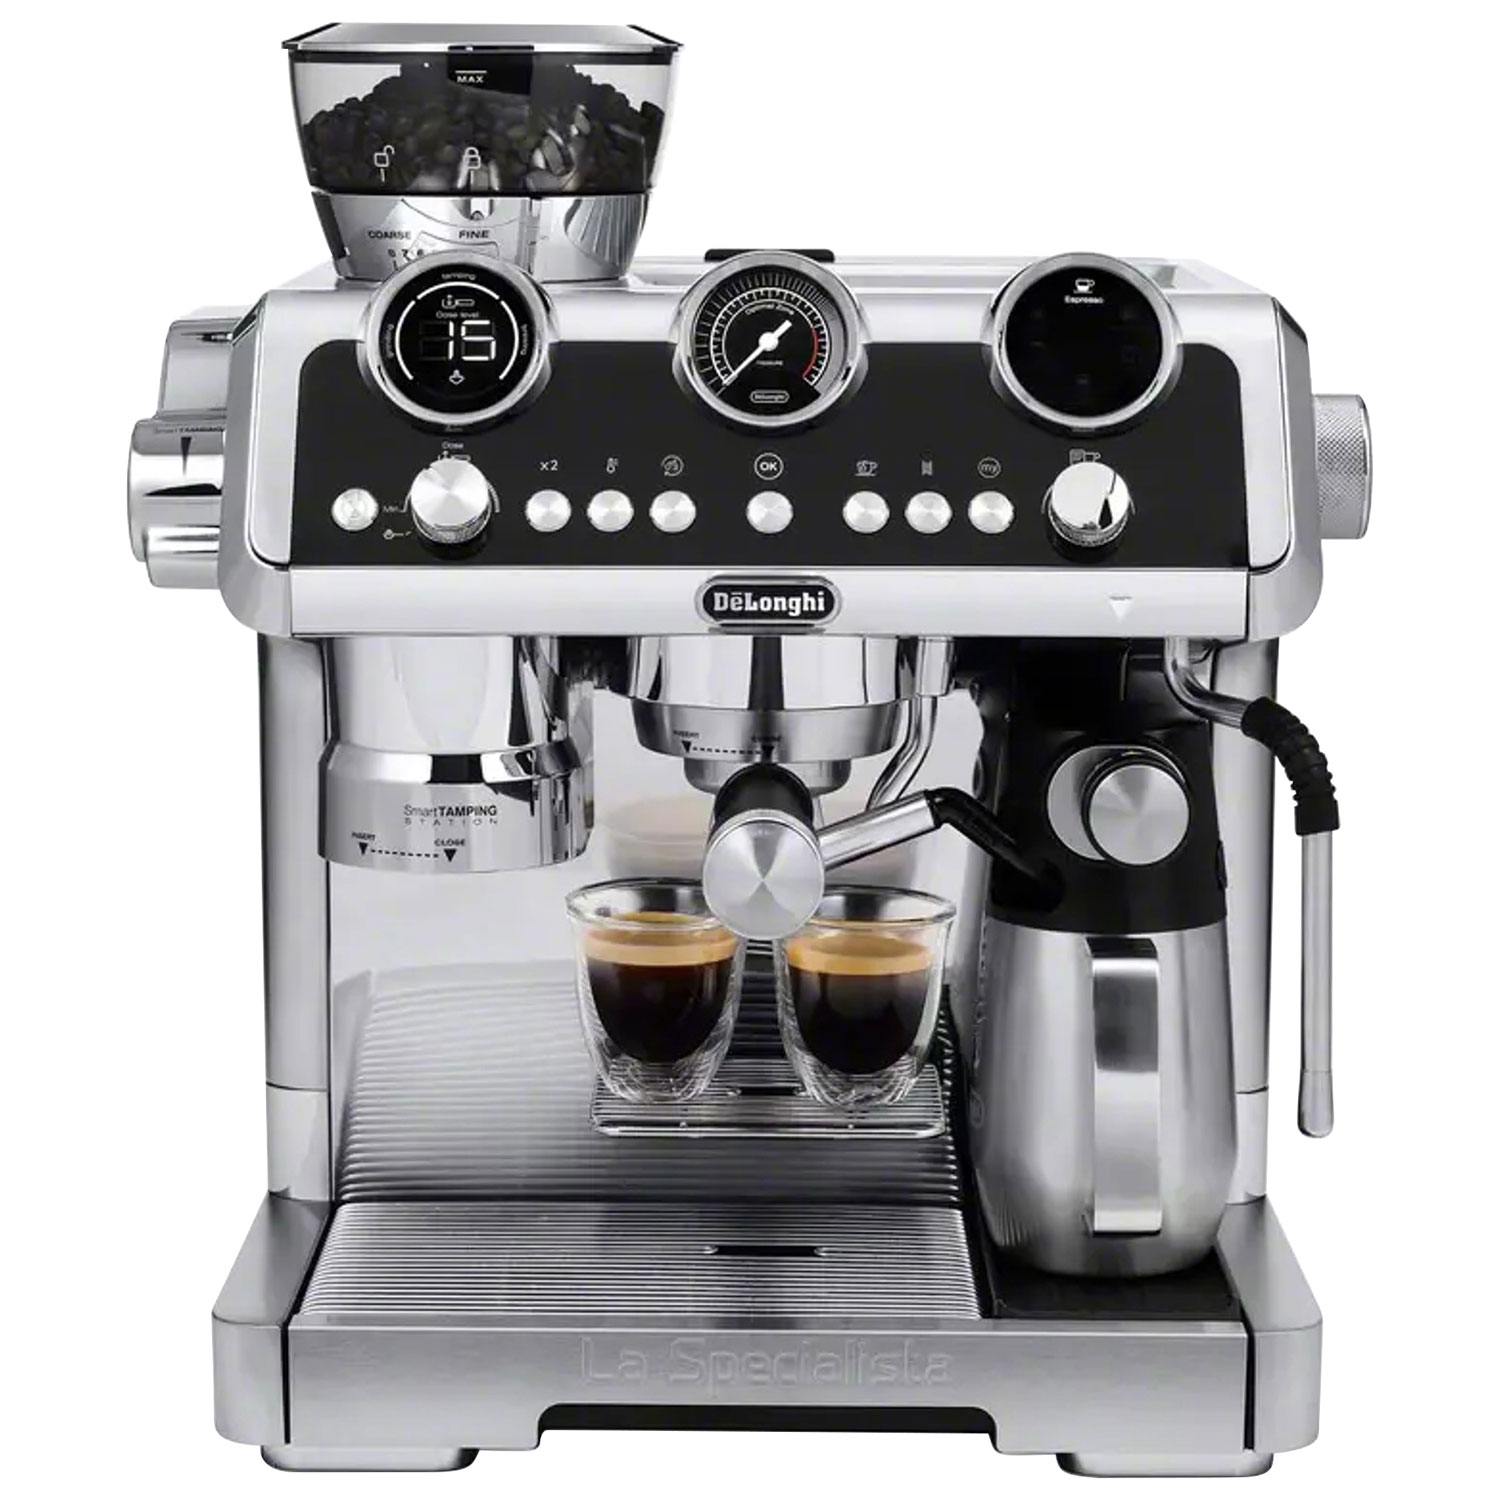 De'Longhi La Specialista Maestro Manual Espresso Machine with Frother & Coffee Grinder - Stainless Steel